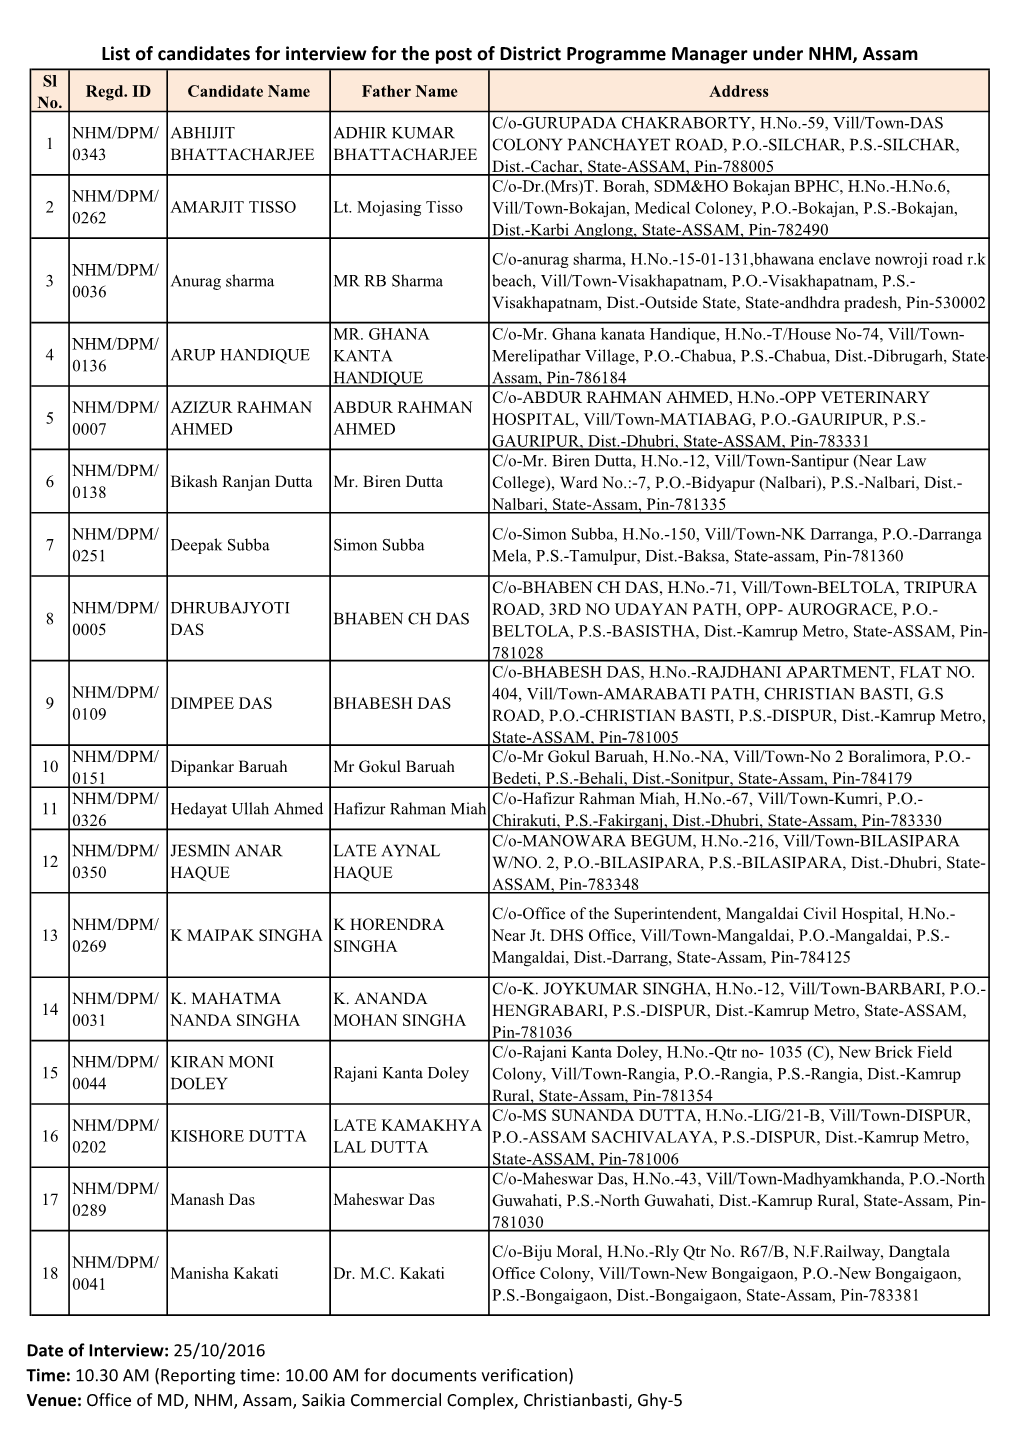 List of Candidates for Interview for the Post of District Programme Manager Under NHM, Assam Sl Regd